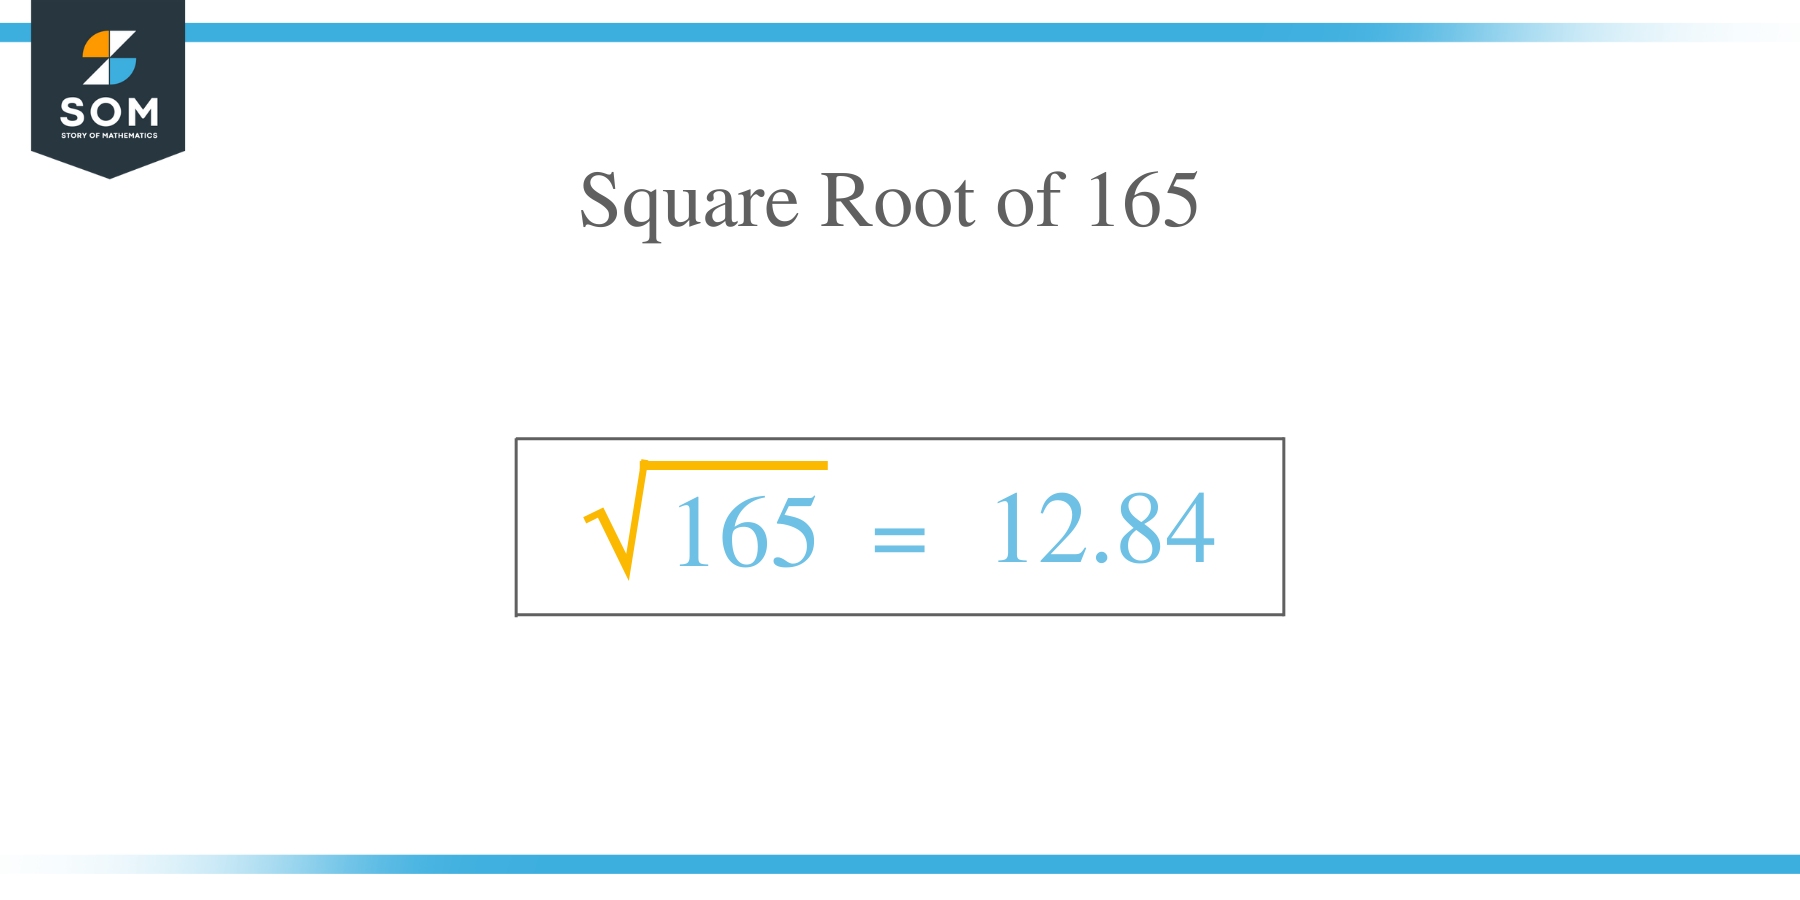 Square Root of 165